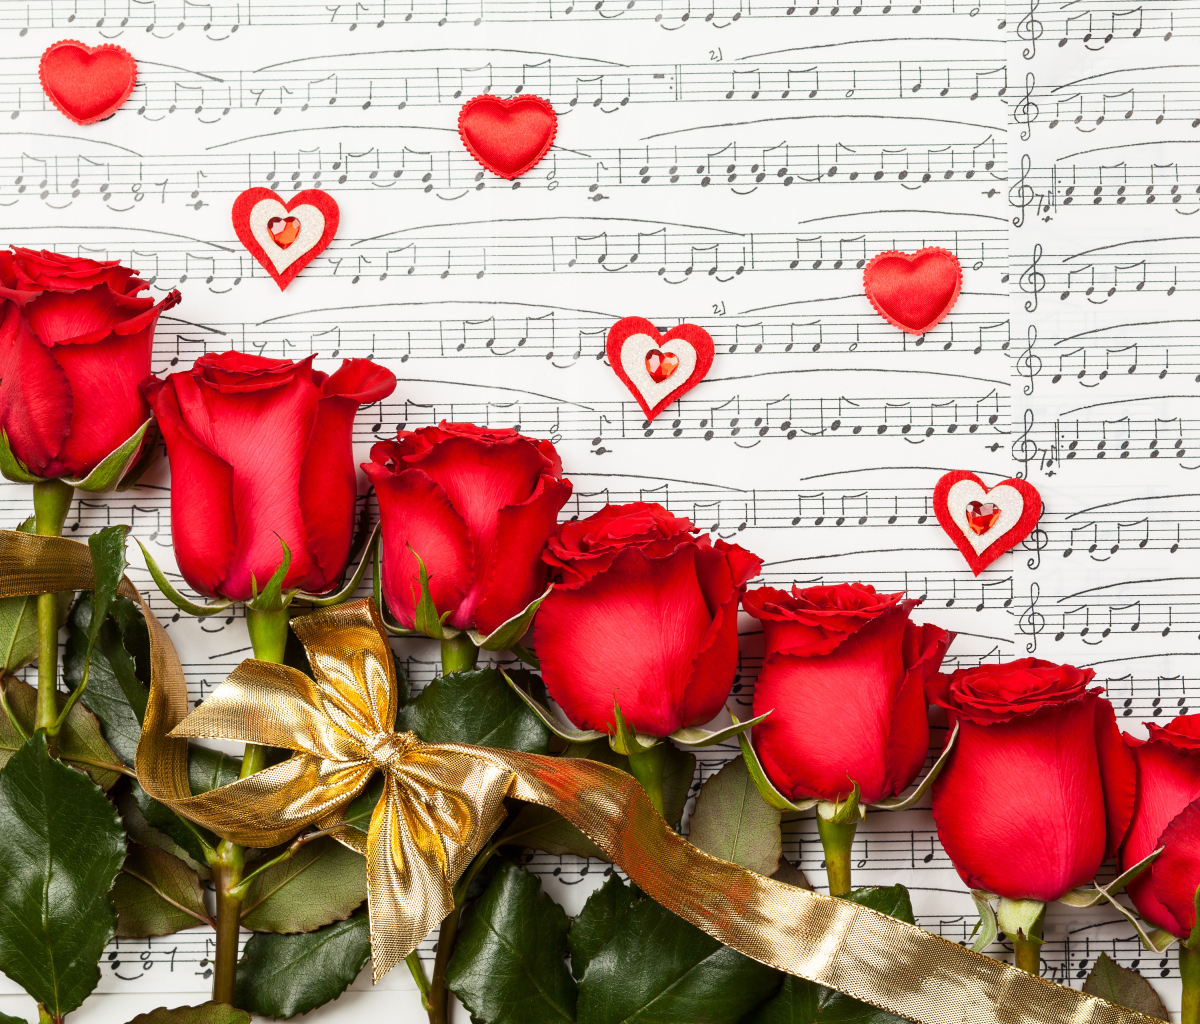 Das Roses, Love And Music Wallpaper 1200x1024